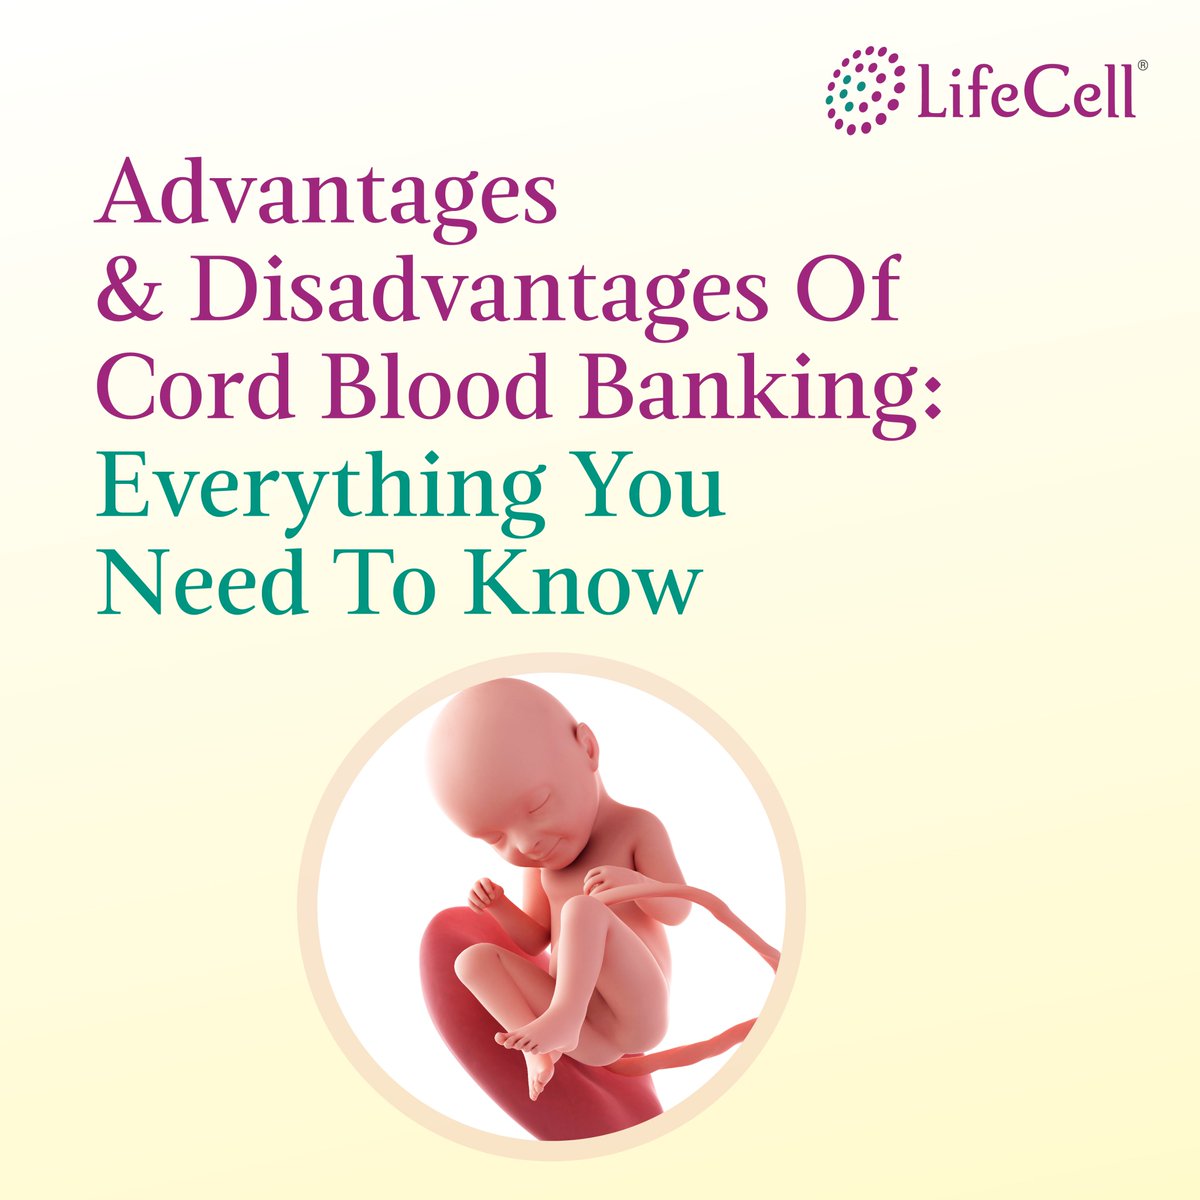 Check out our #blog on #Advantages & Disadvantages Of Cord Blood Banking. Discover the life-saving potential of #umbilicalcordbloodstemcells & why banking your baby's #cordblood is crucial. Learn about why LifeCell’s Community Stem Cell Banking is superior to private banking.